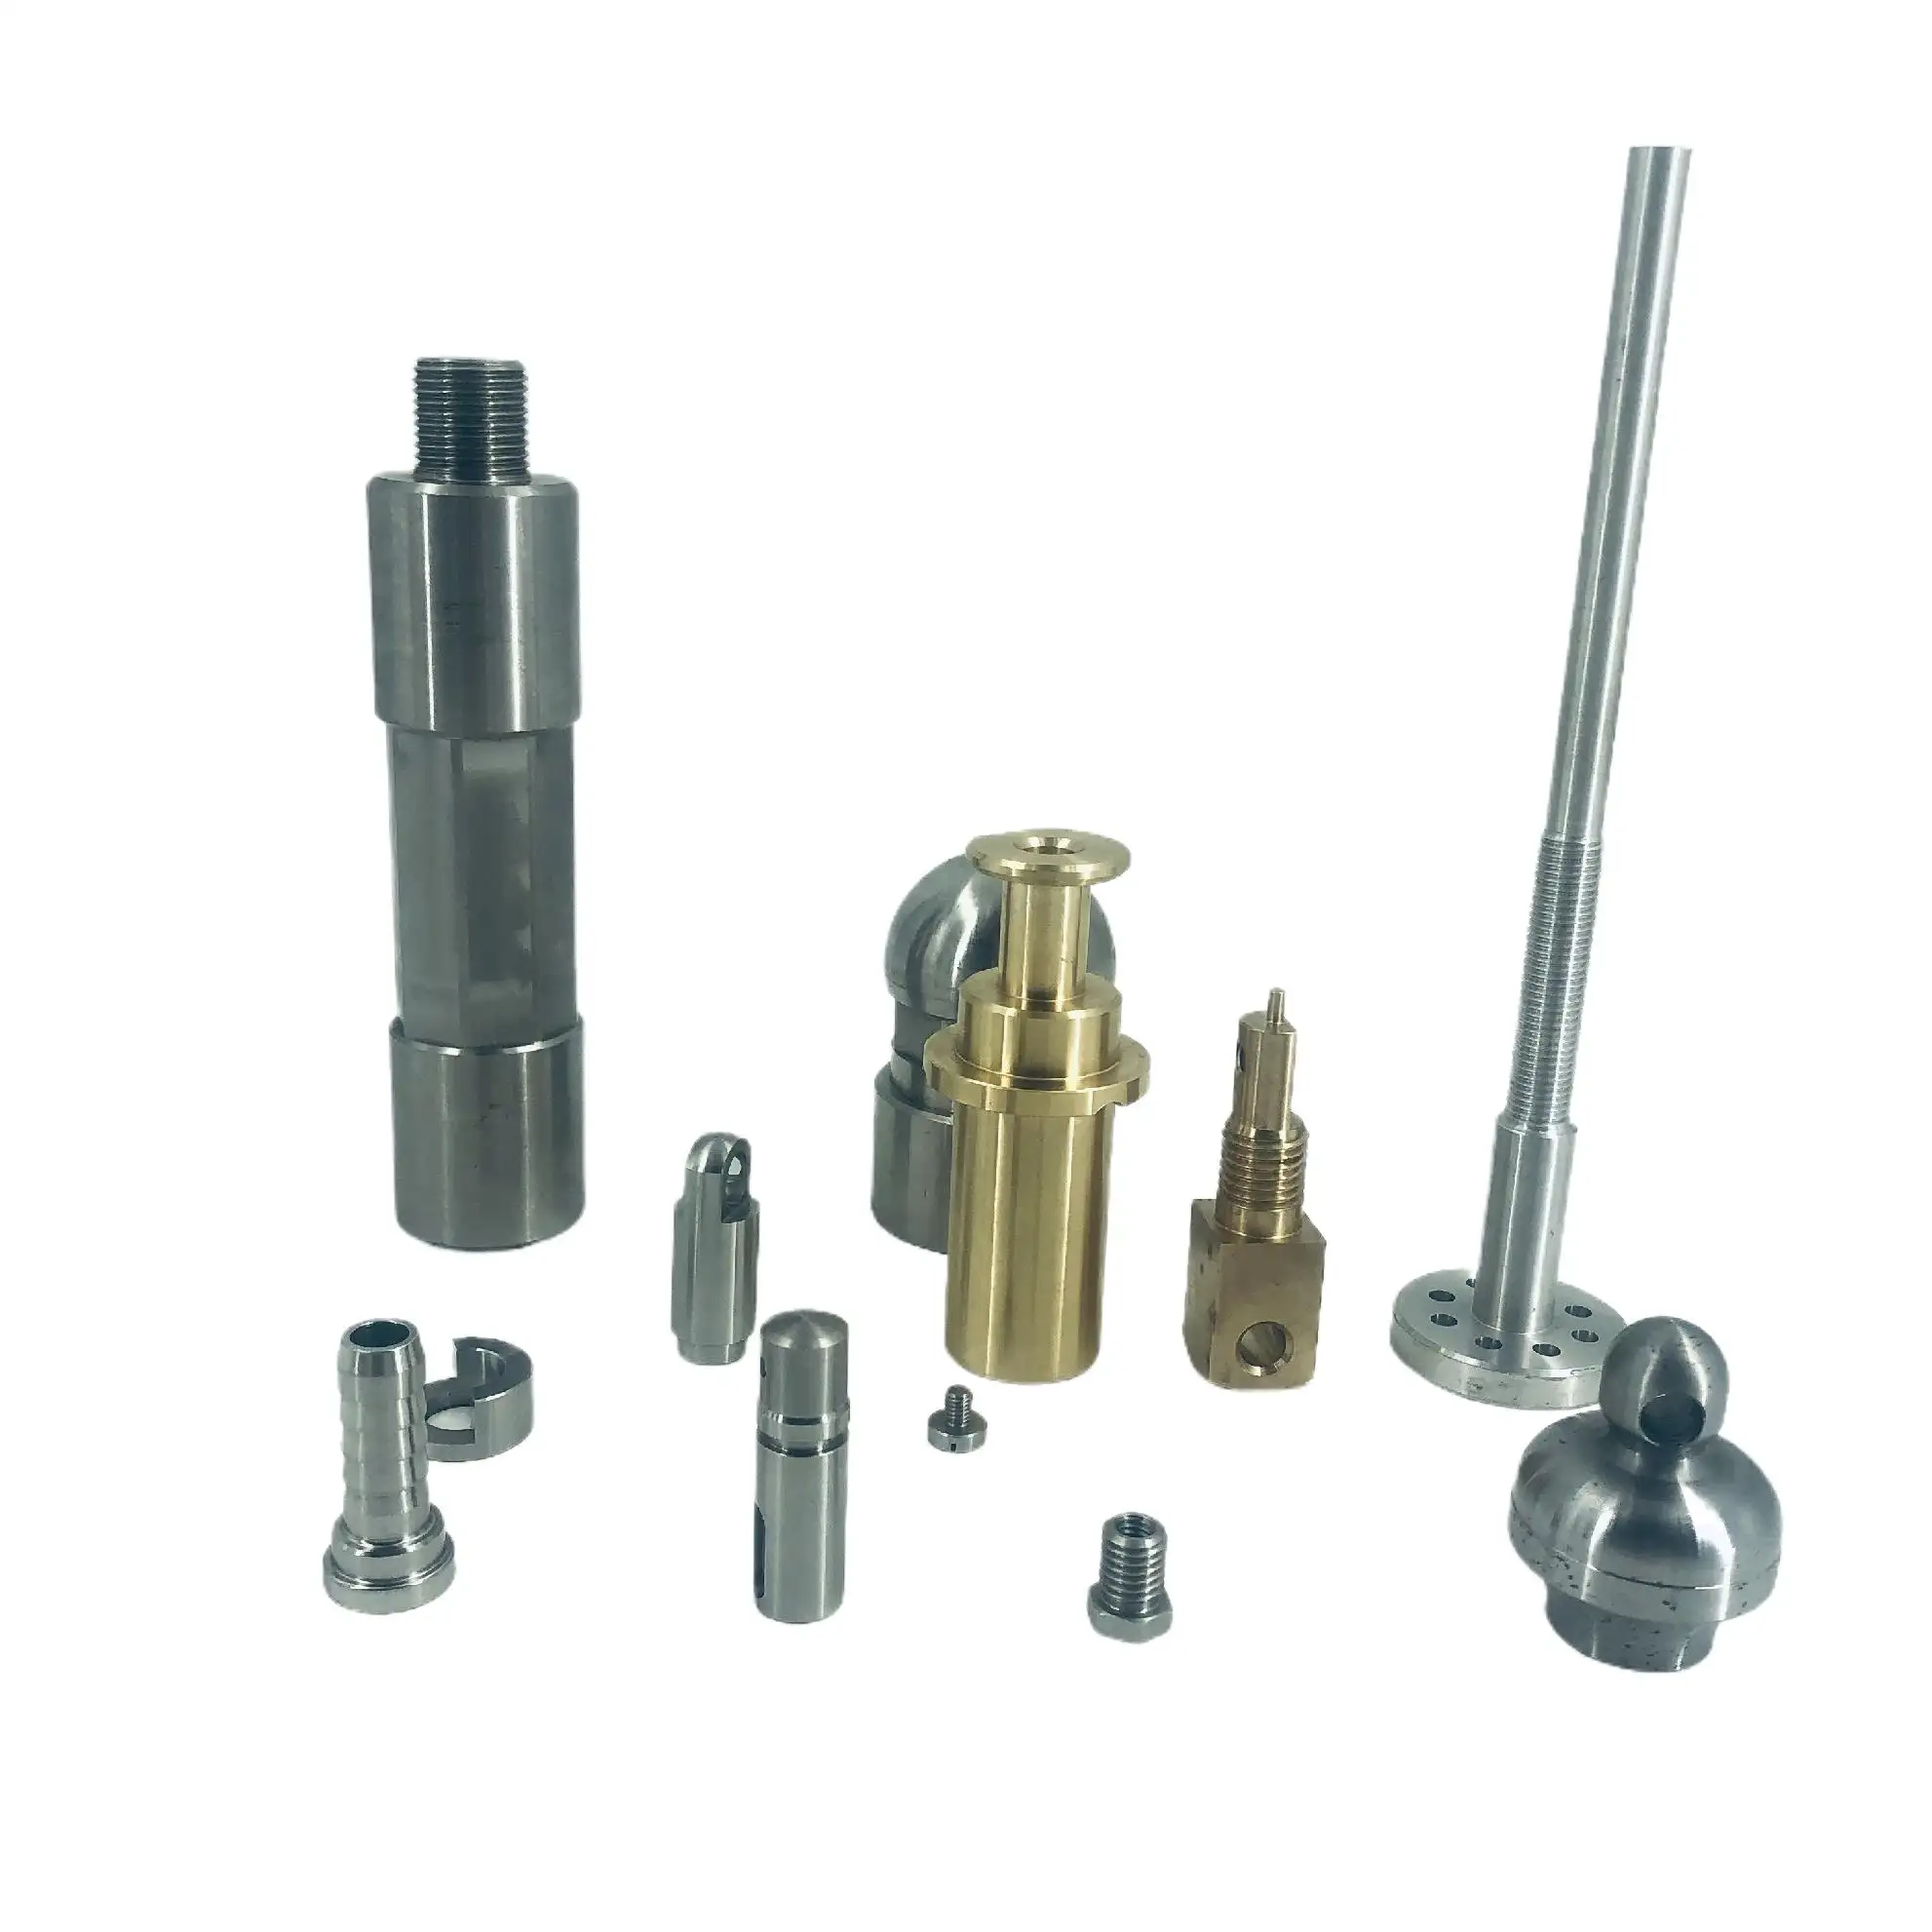 Oem Cnc Milling Service Cnc Turning Service Stainless Steel Aluminum Customized Cnc Machining Parts Mechanical Parts